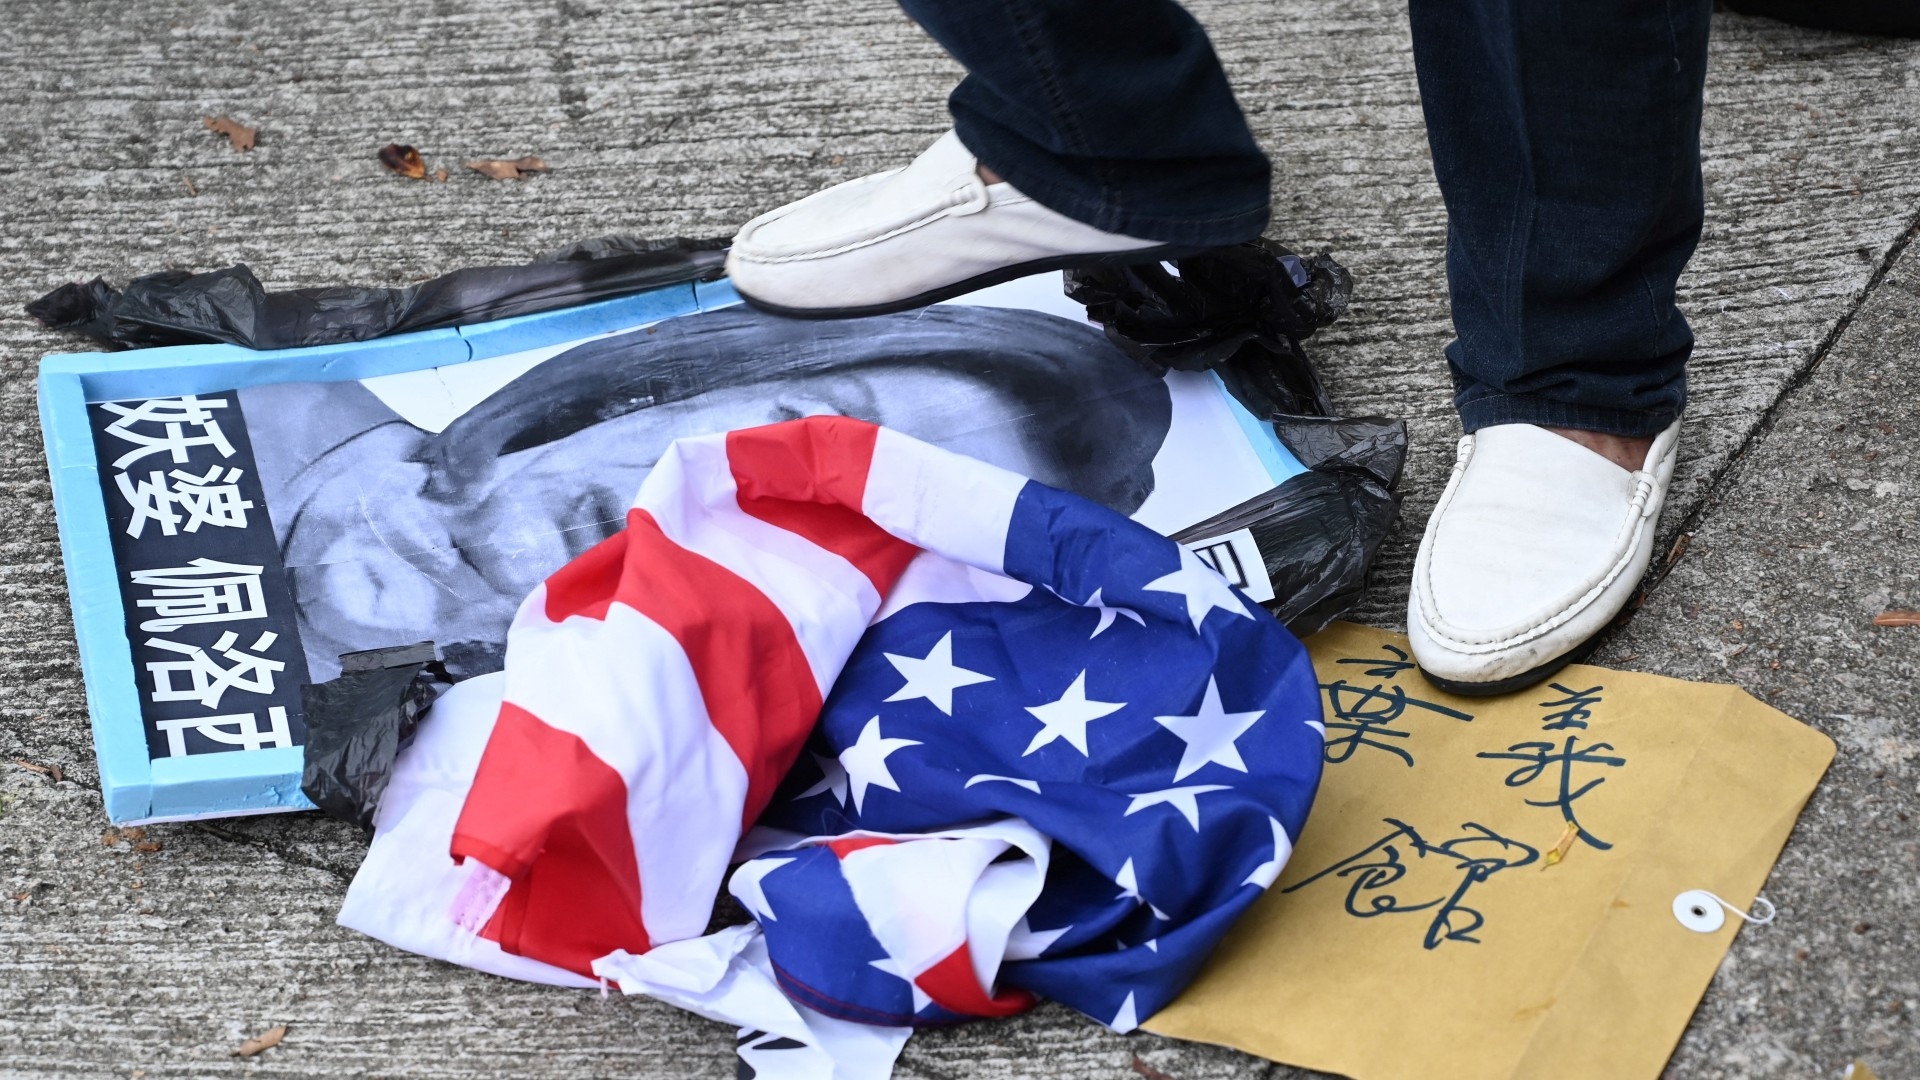 A pro-Beijing protester stamps on an image depicting the US House Speaker Nancy Pelosi and the US flag at a protest outside the US Consulate in Hong Kong on 3 August, 2022 (AFP)